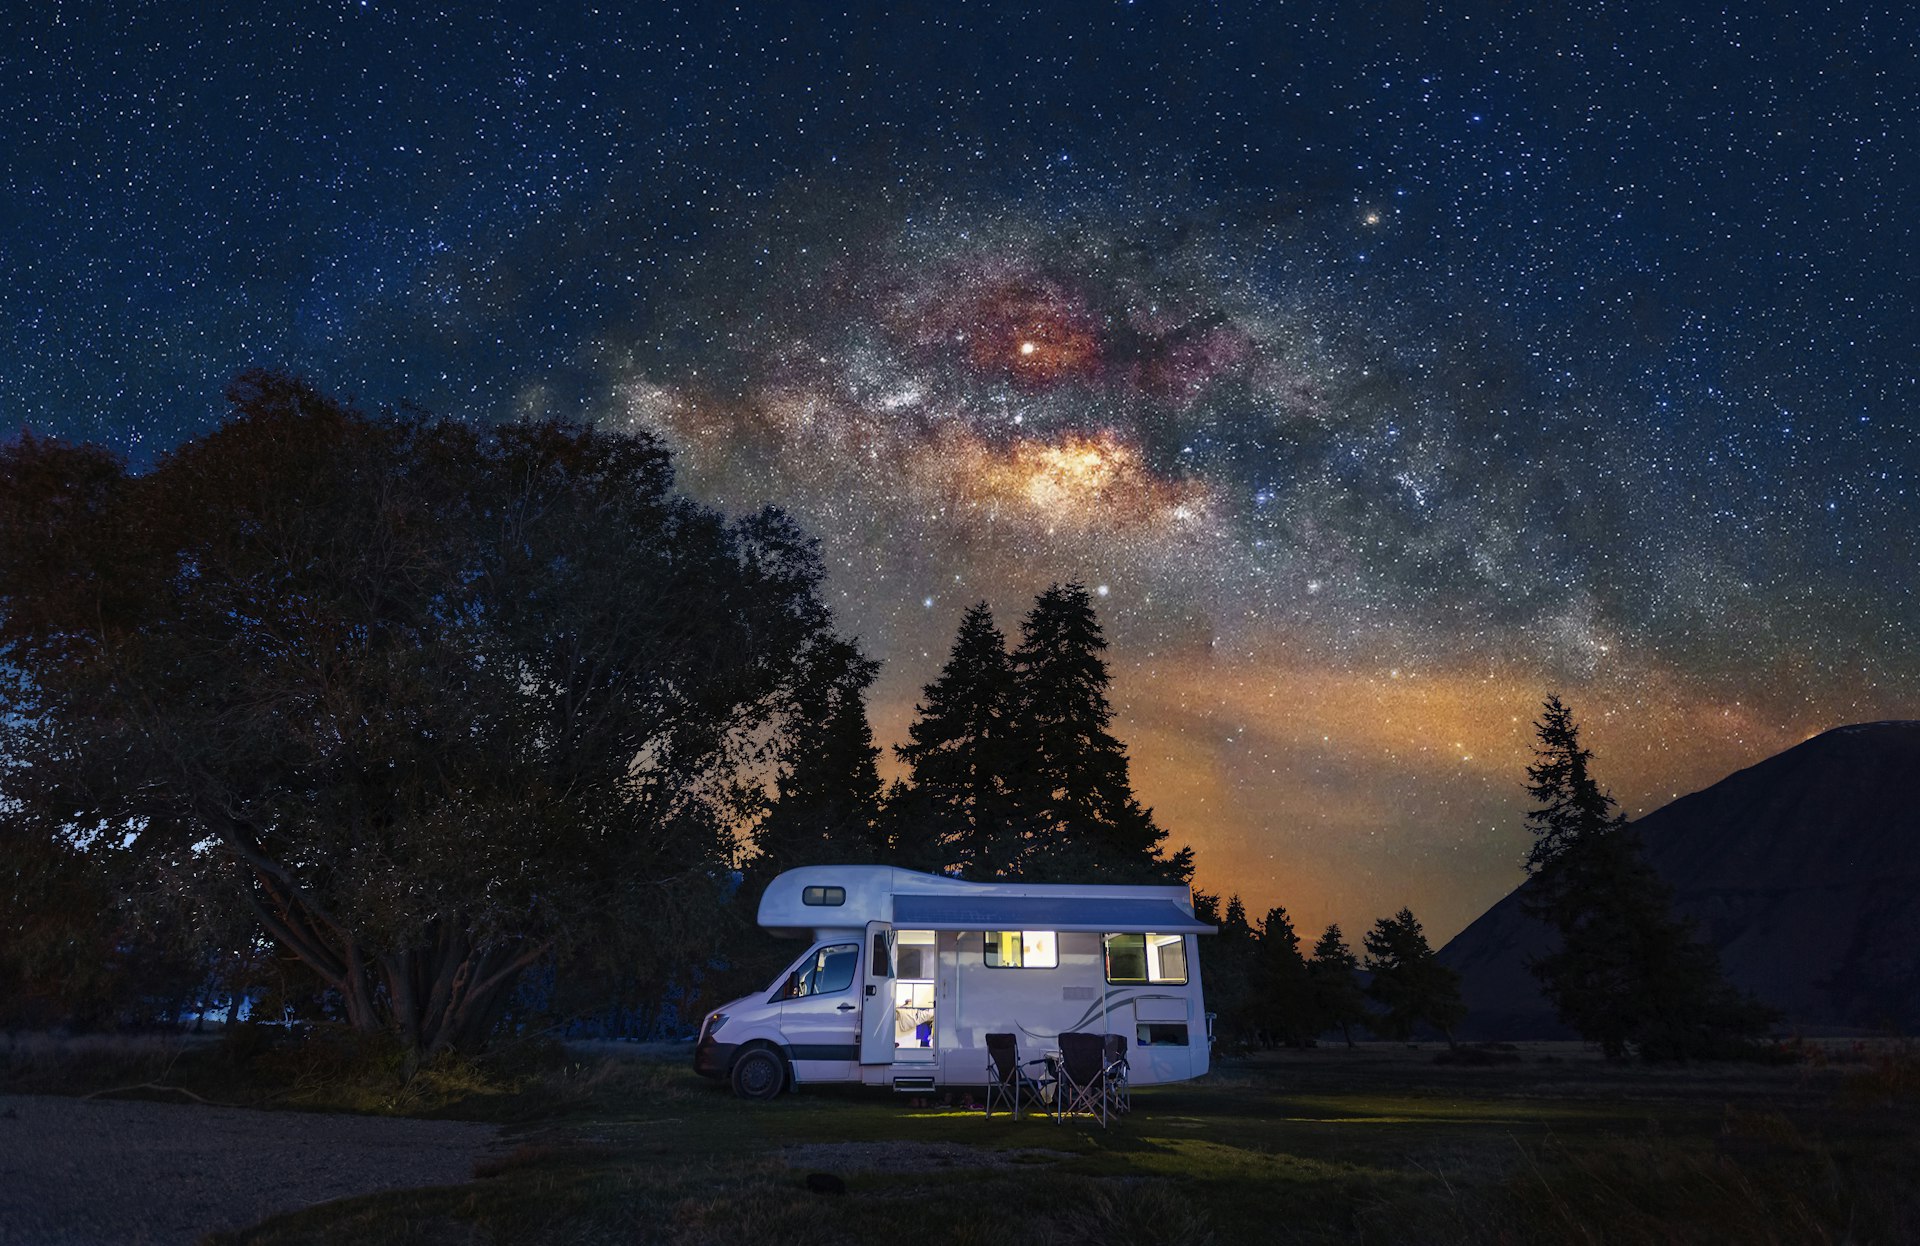 Motorhome at free camp site with milky way sky in New Zealand.